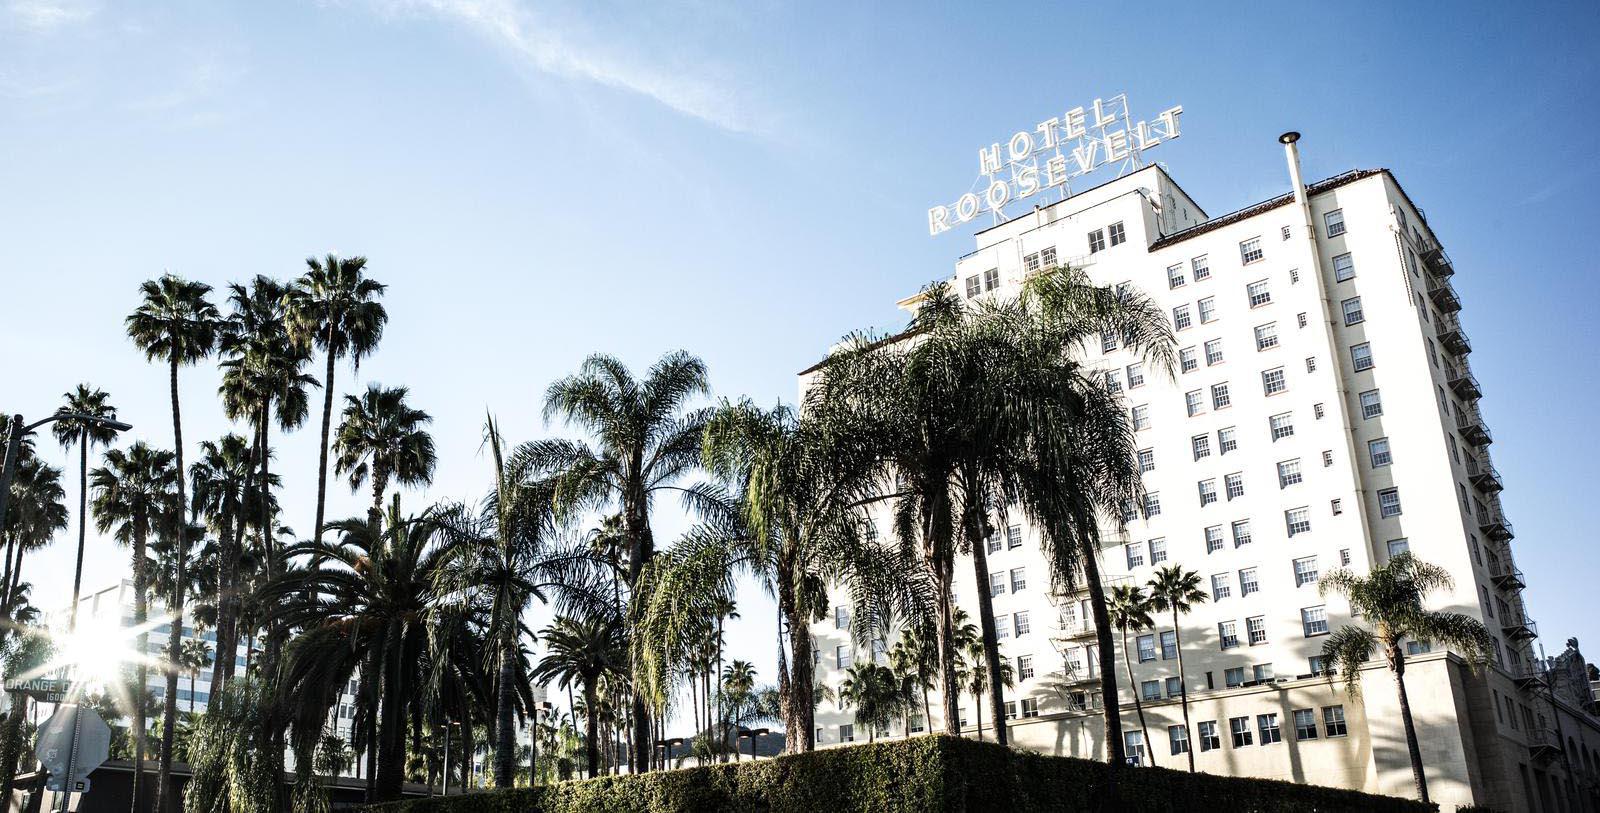 Image of Hotel Exterior with Palm Trees The Hollywood Roosevelt, 1927, Member of Historic Hotels of America, in Hollywood, California, Special Offers, Discounted Rates, Families, Romantic Escape, Honeymoons, Anniversaries, Reunions